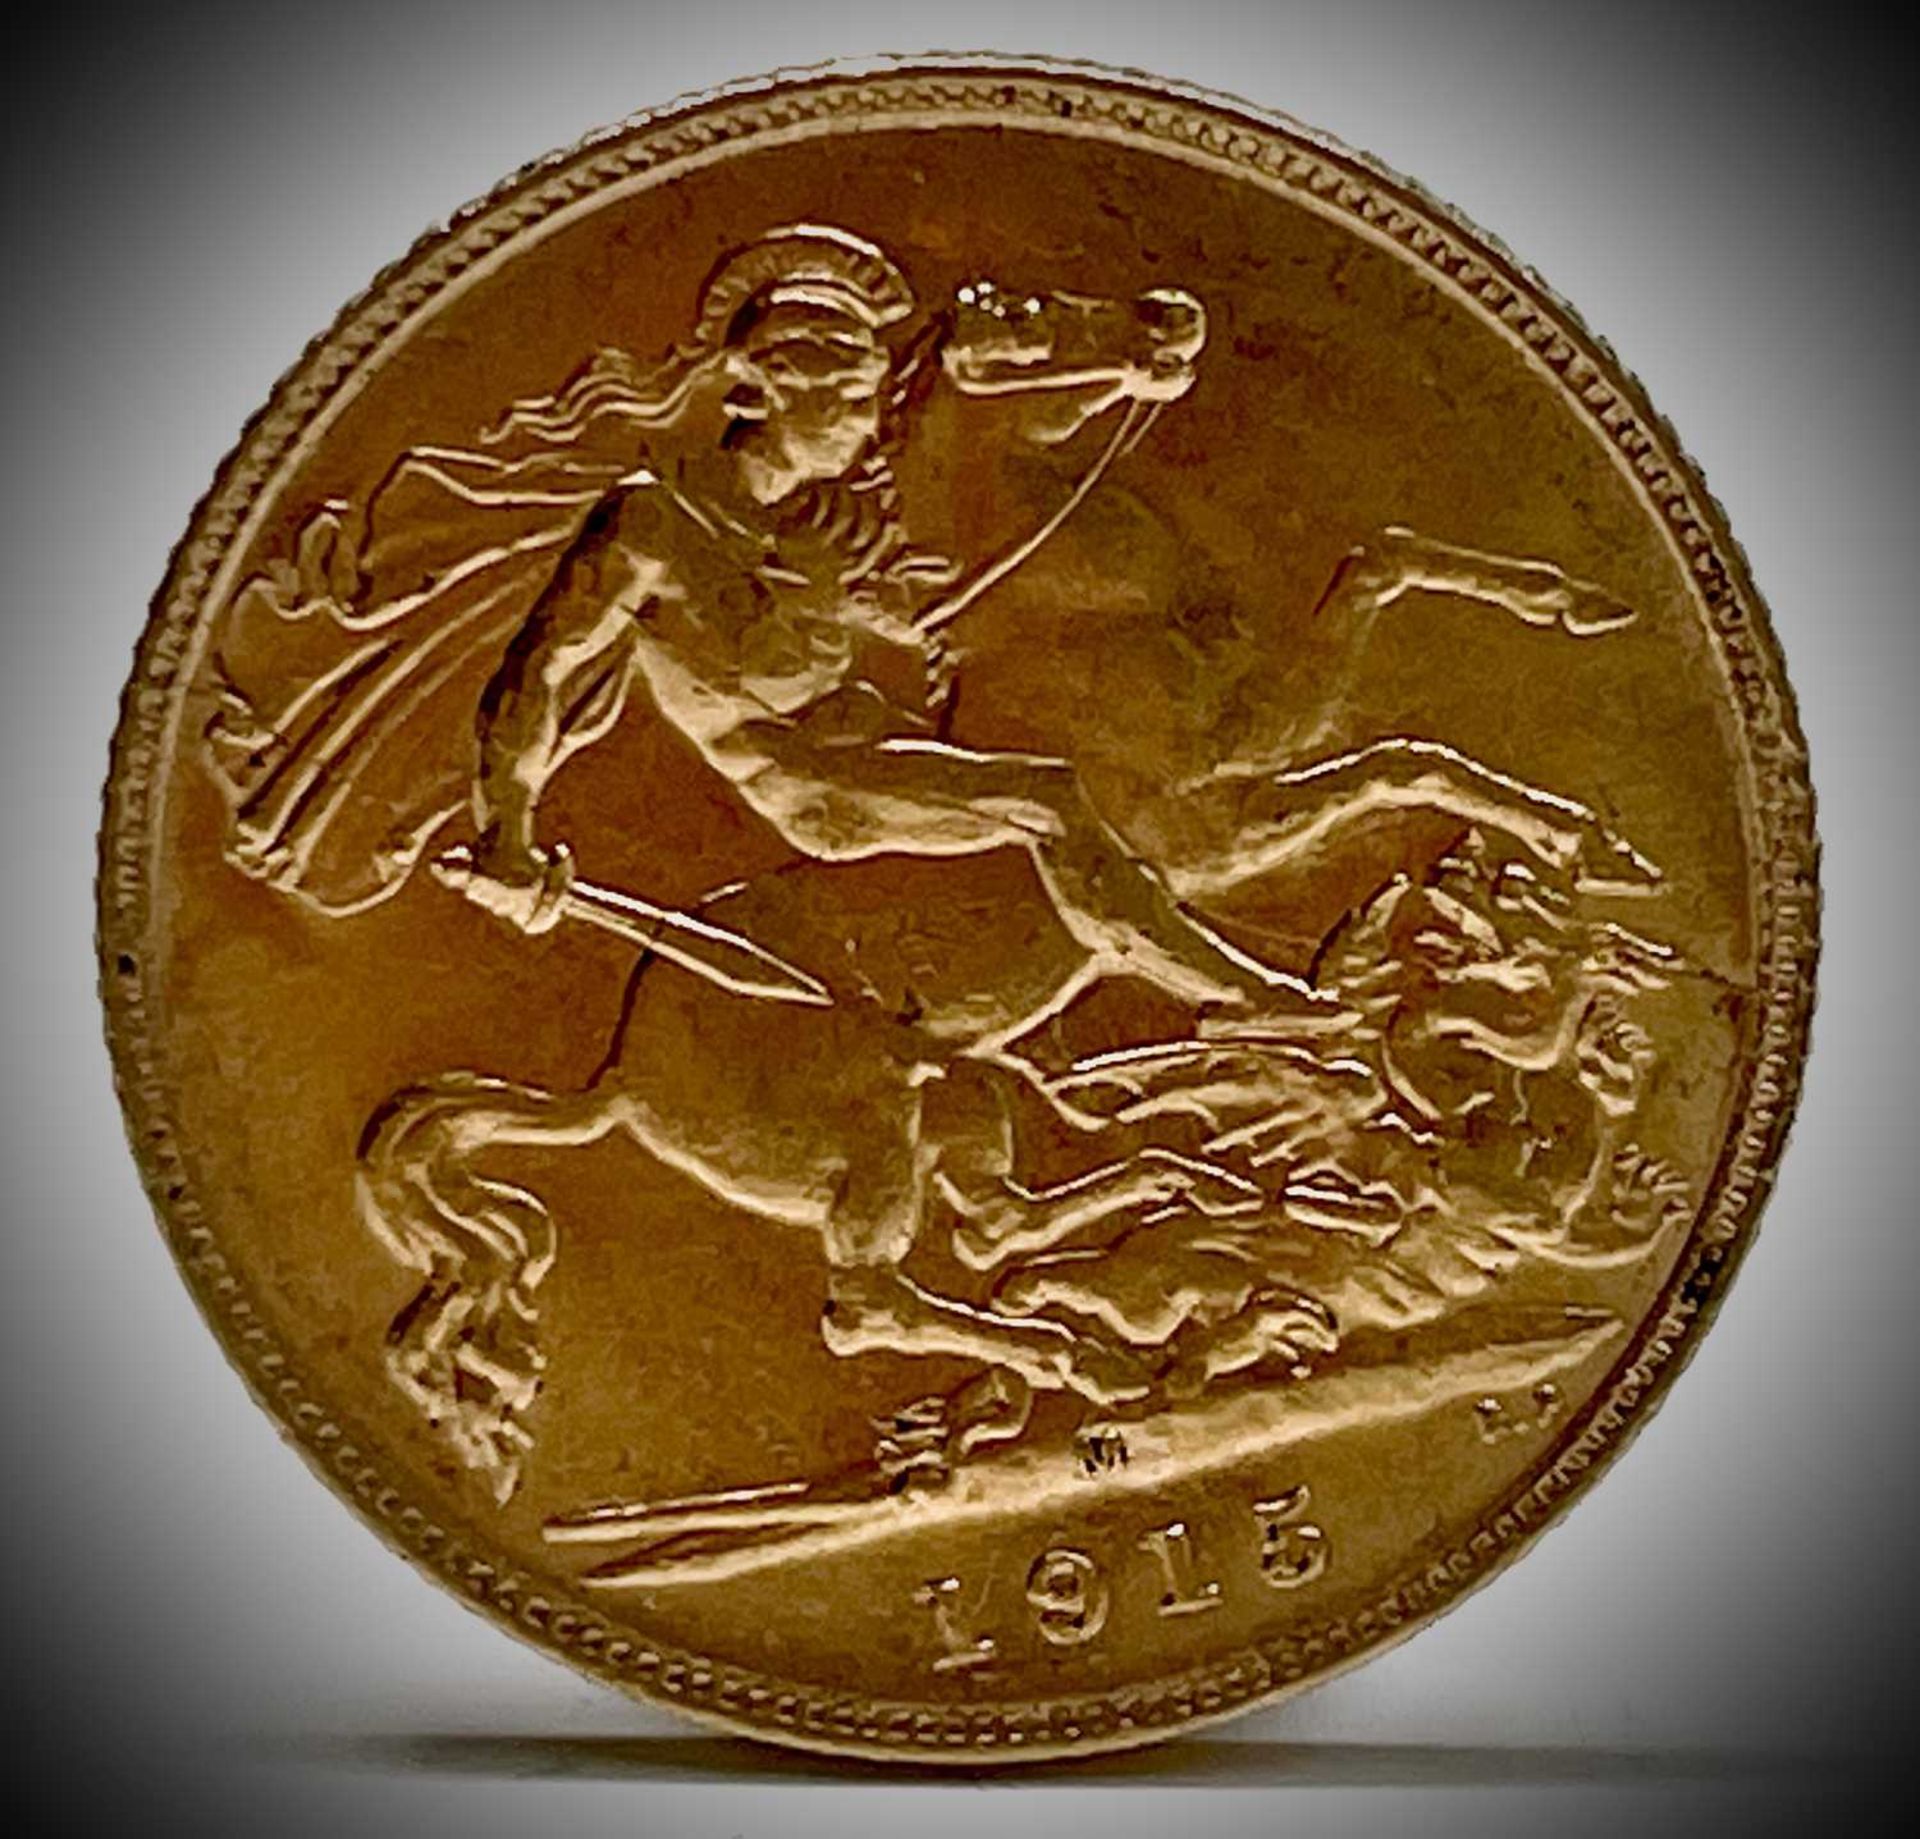 Great Britain Gold Half Sovereign 1915 King George V A.UNC Condition: please request a condition